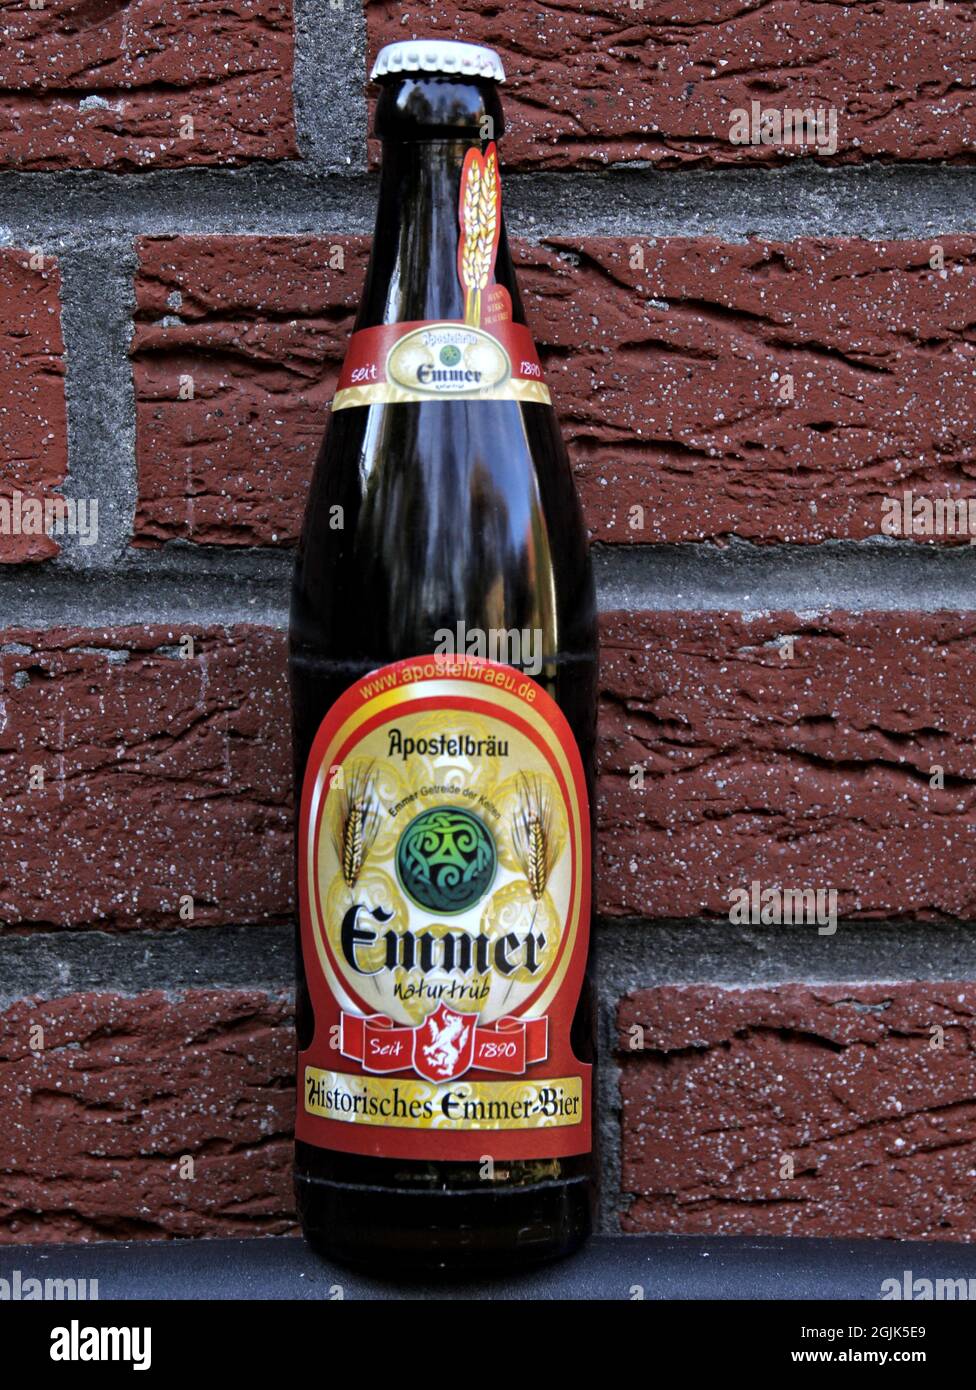 BAYERN, GERMANY - Sep 02, 2021: it's a special emmer beerthe bottle is in front of a wall emmer is a special type of cereal this is a historic beer Stock Photo